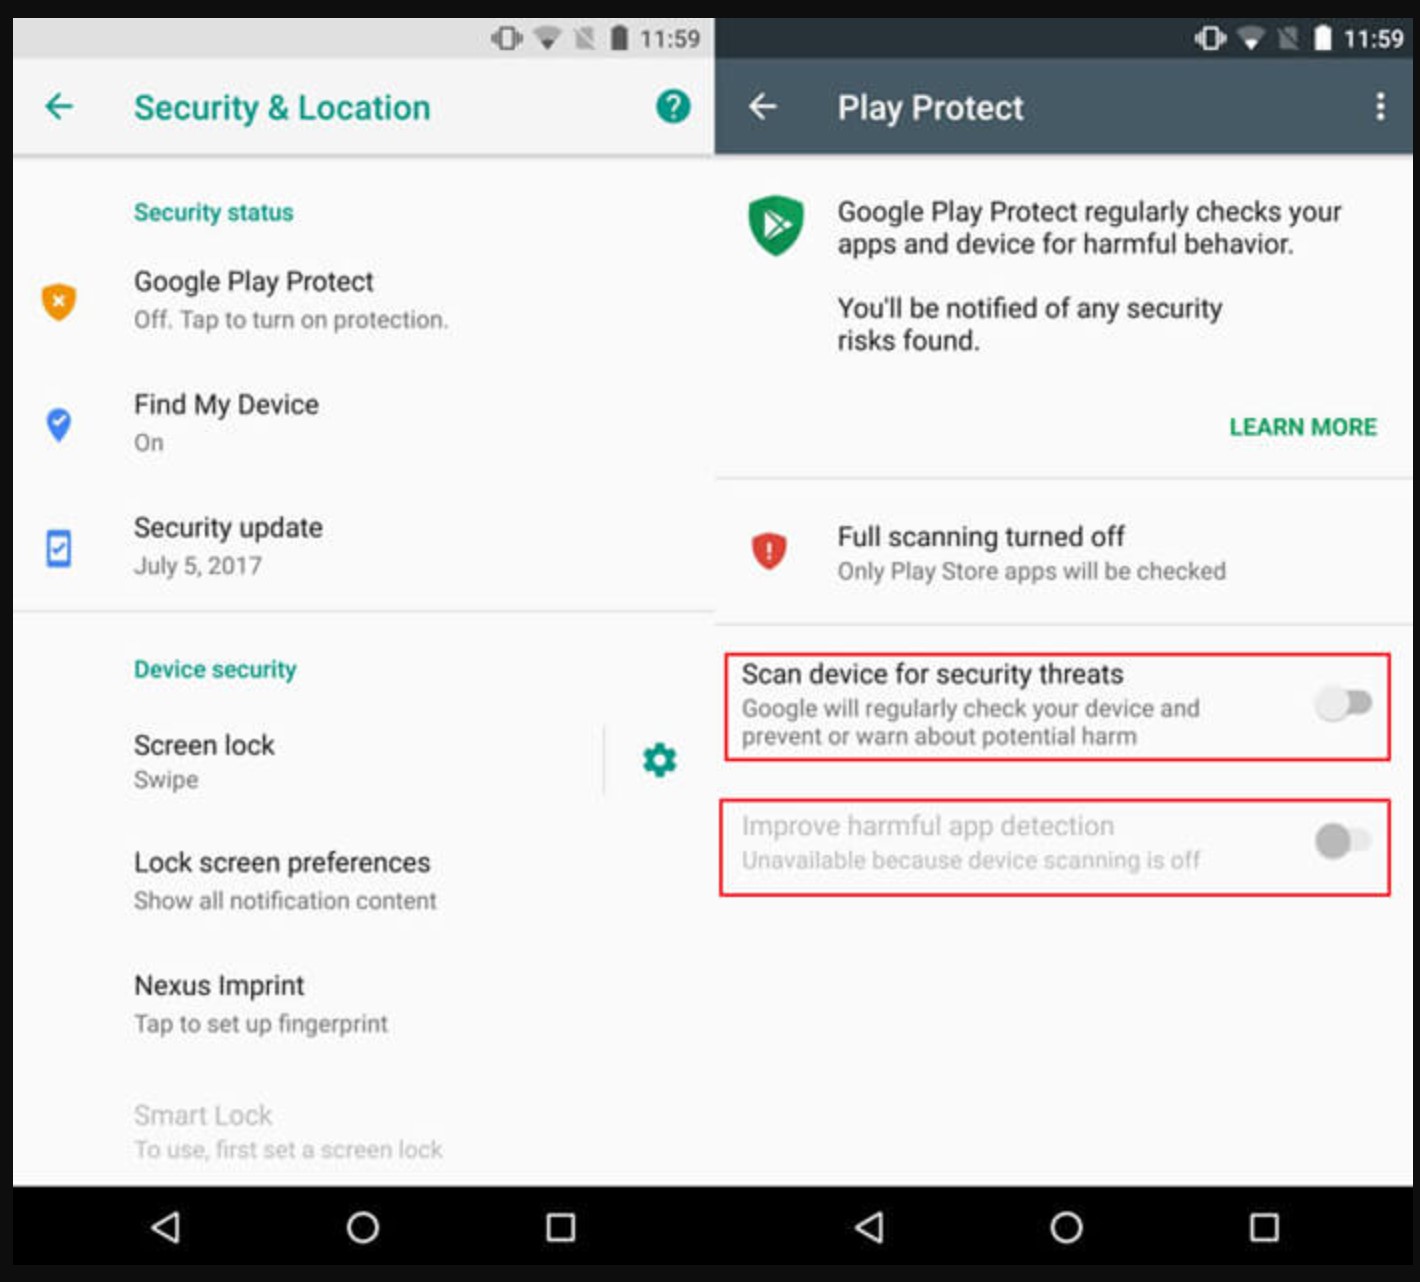 Disable Play Protect Cocospy app review